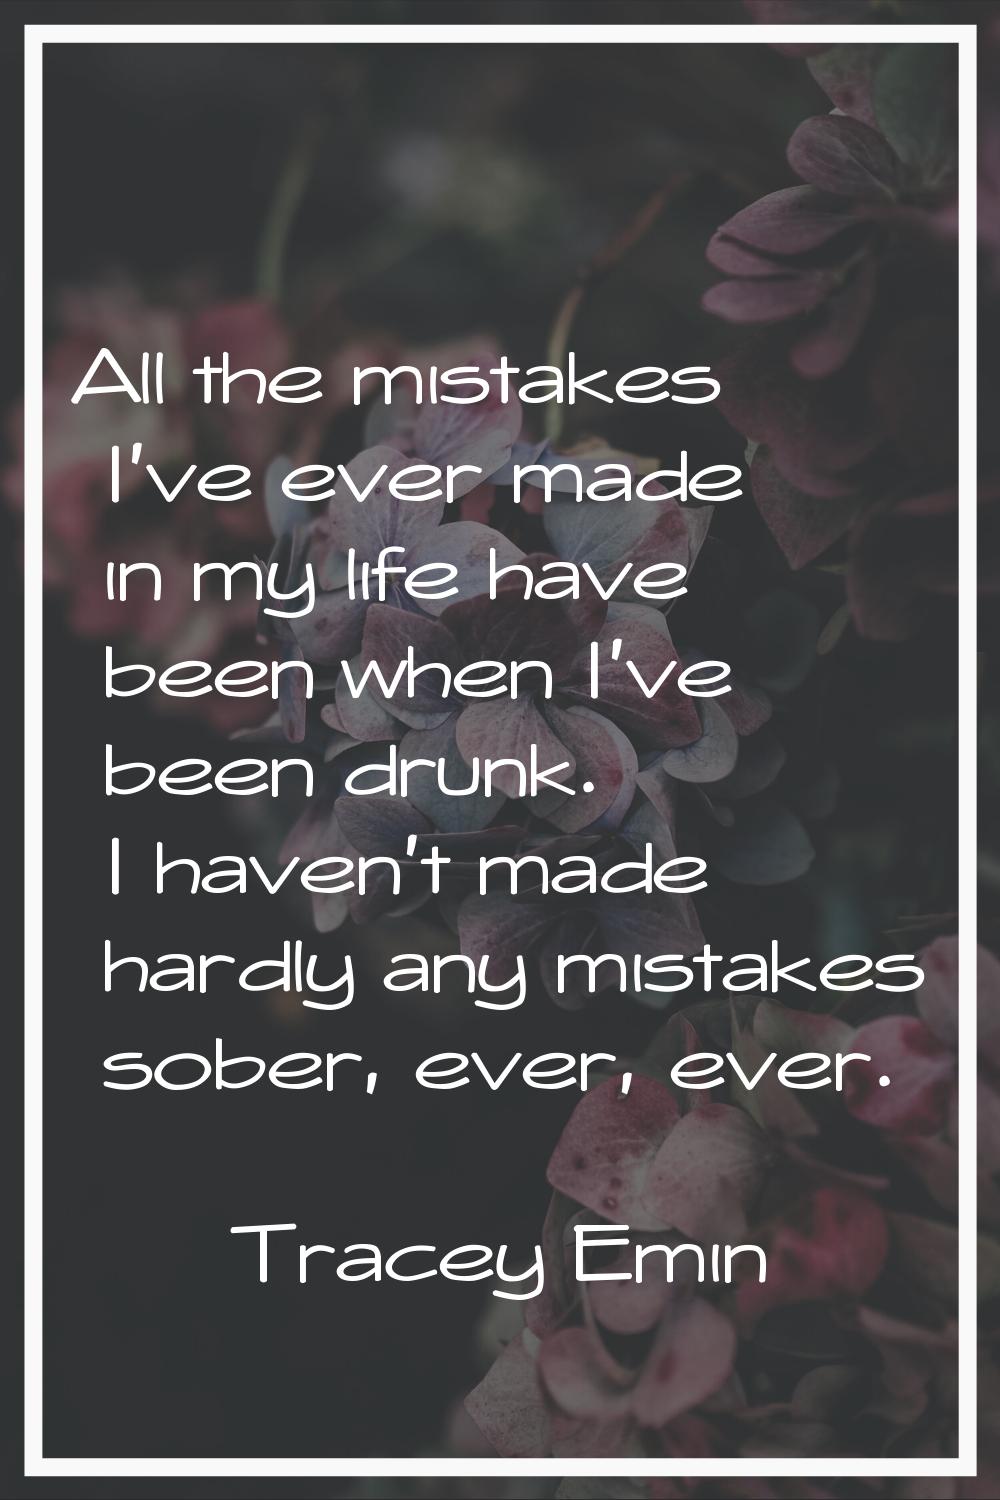 All the mistakes I've ever made in my life have been when I've been drunk. I haven't made hardly an